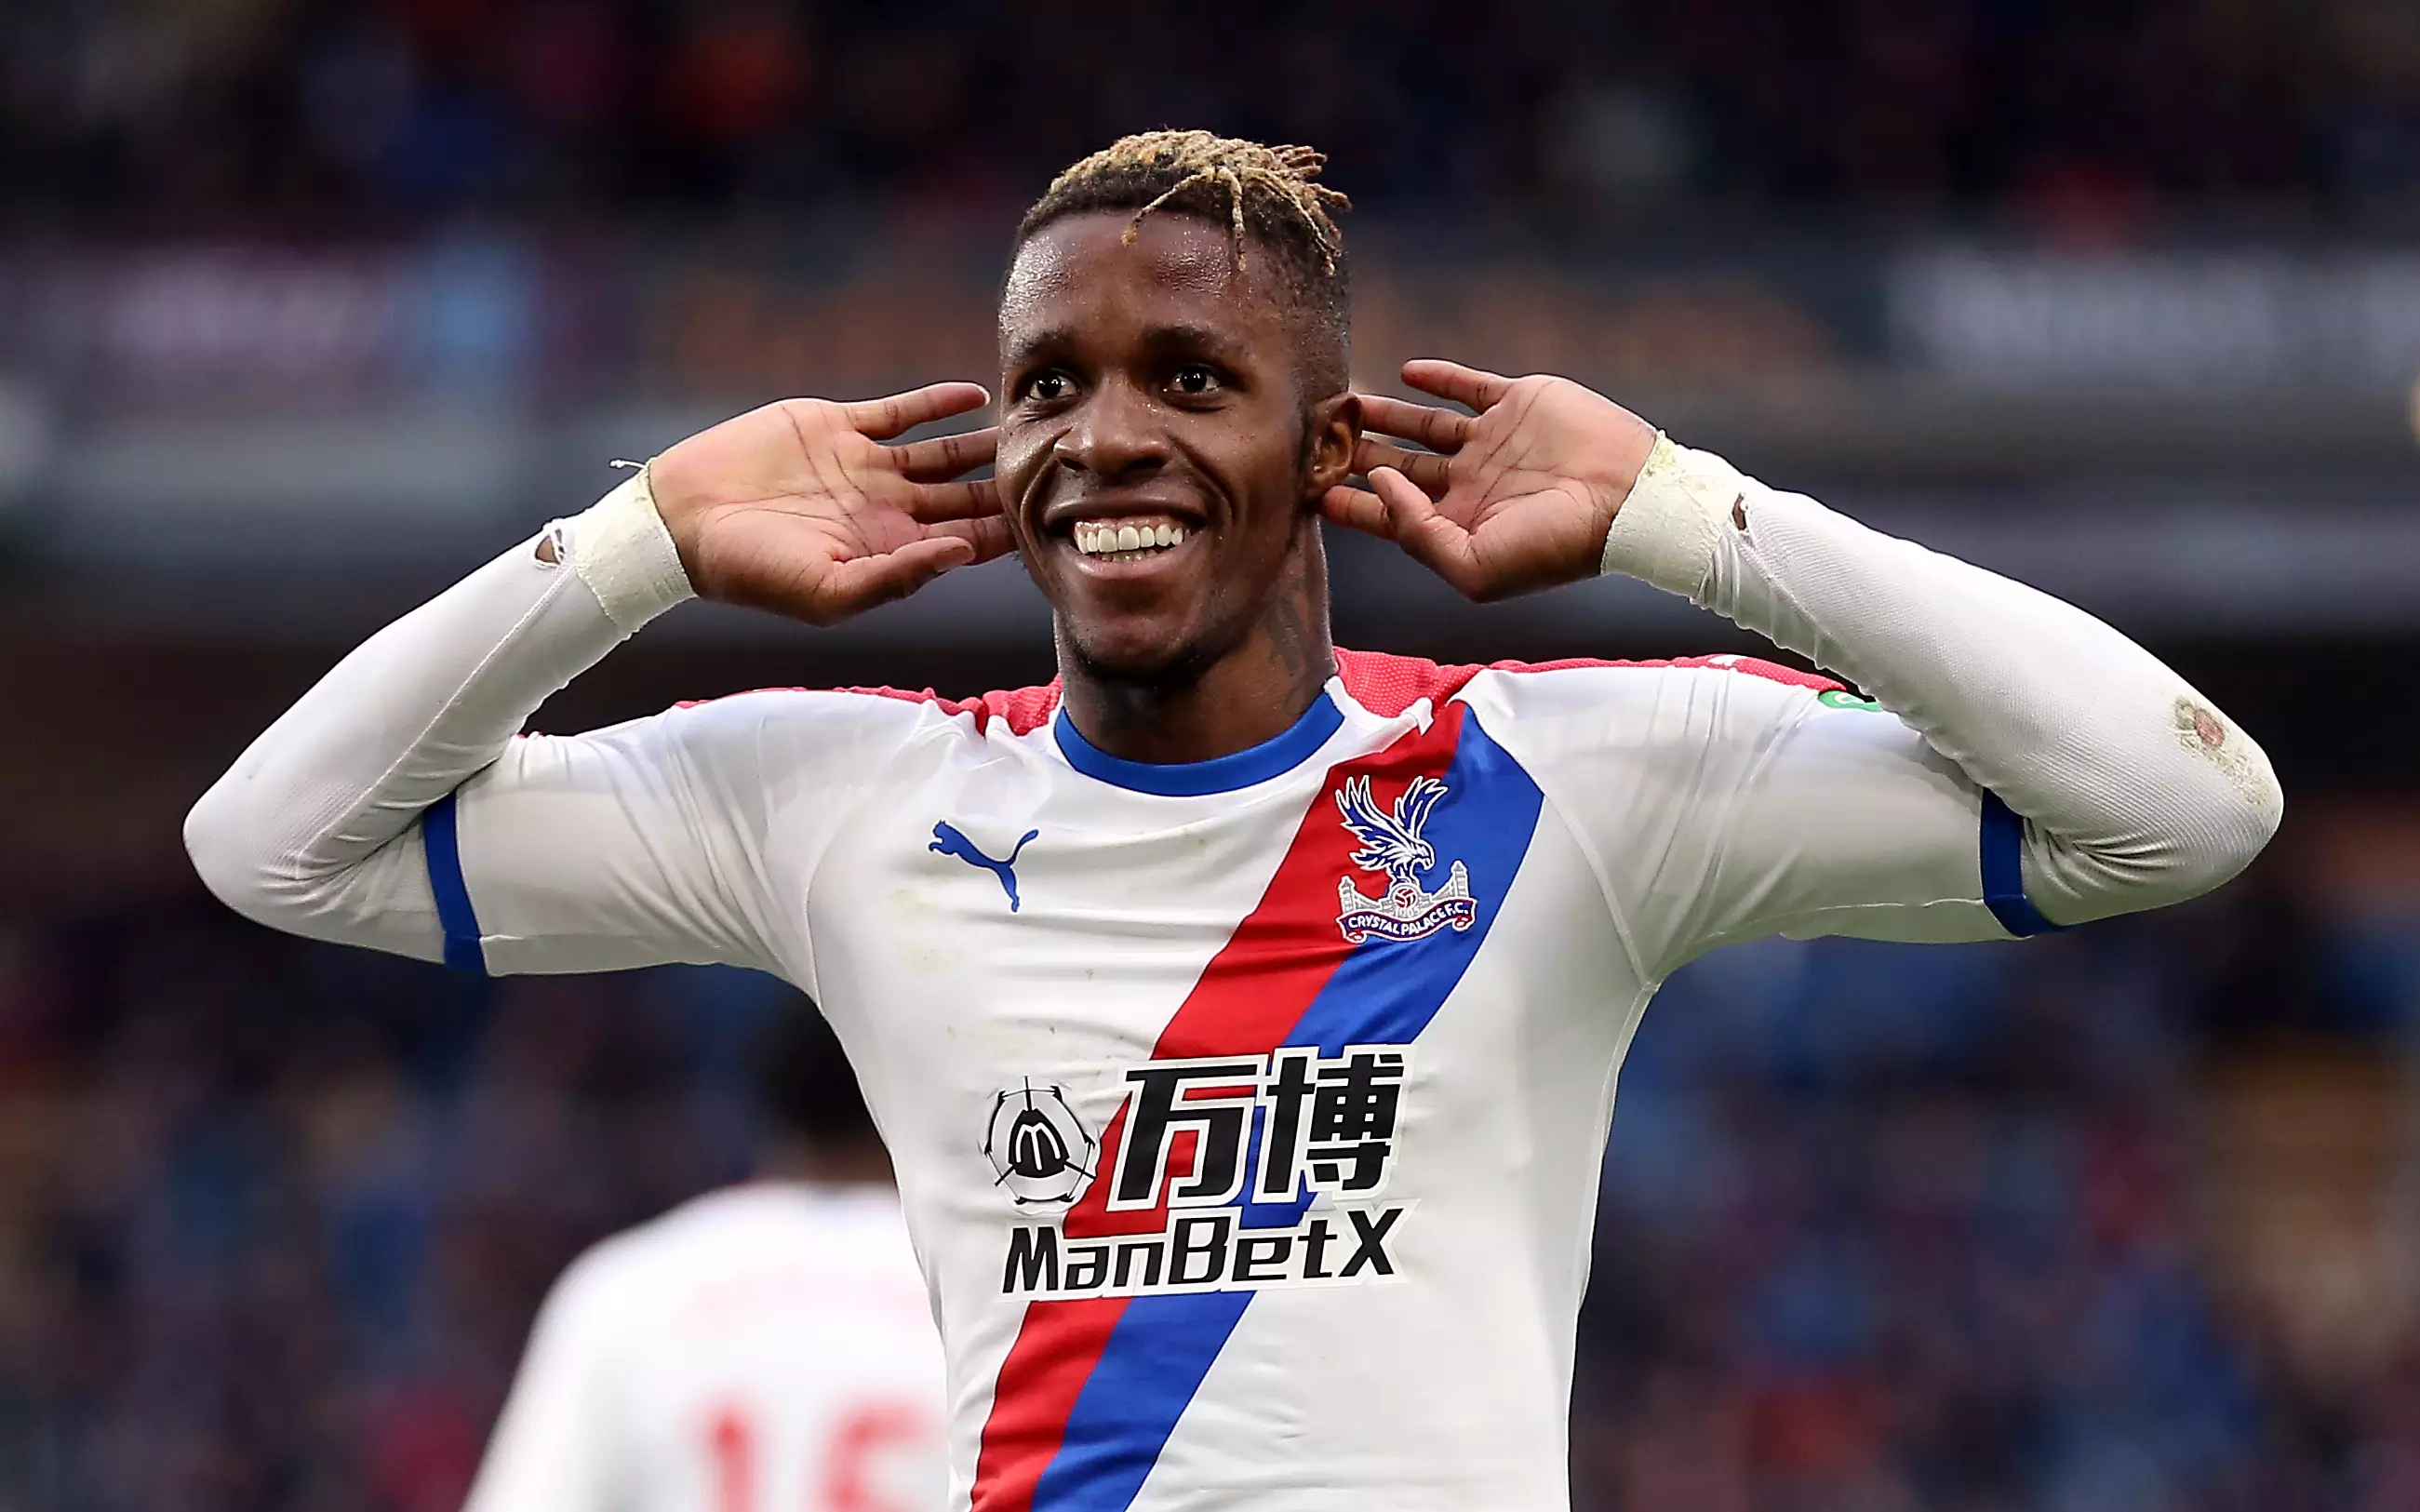 Zaha celebrating, but will he be celebrating a transfer soon? Image: PA Images